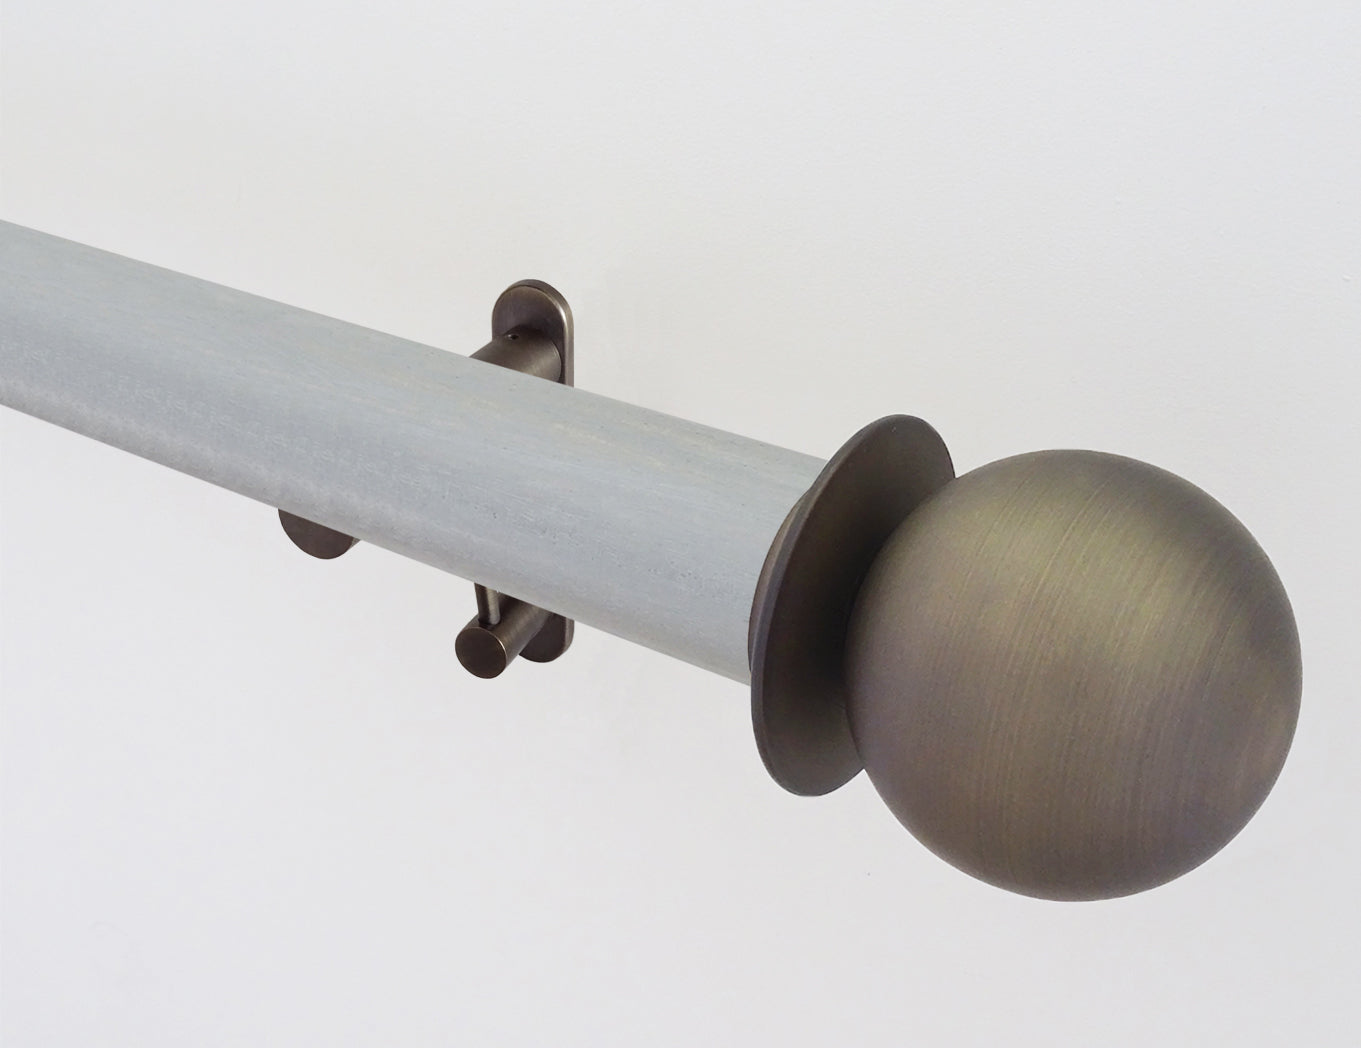 50mm dia. wood pigeon stained wooden curtain pole set with metal ball finials